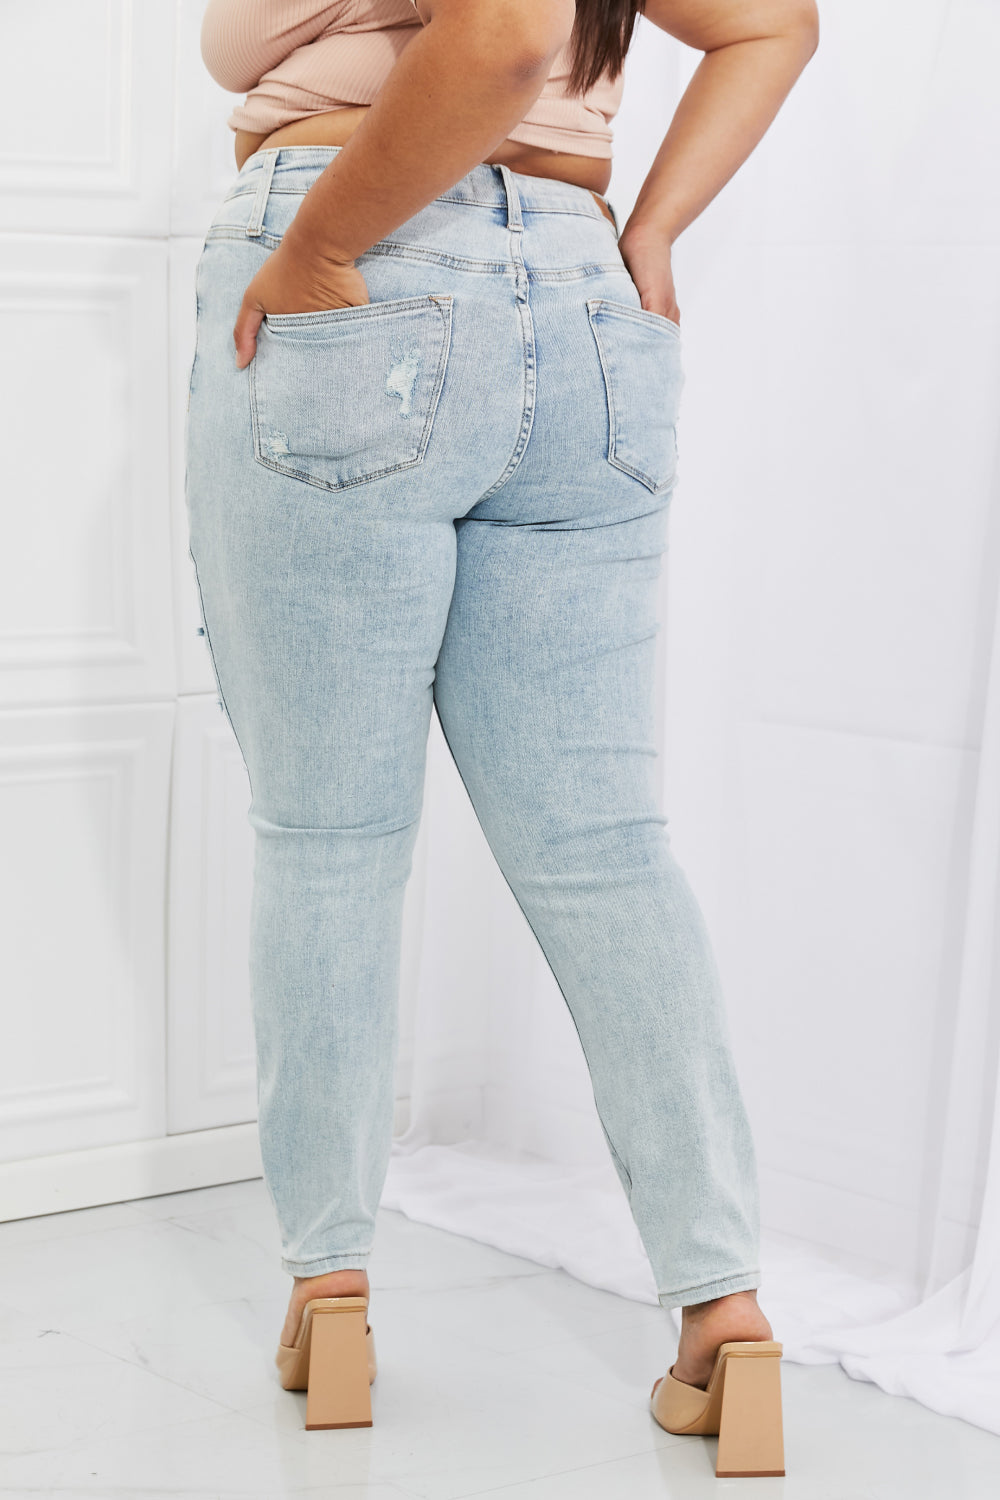 High Waisted Distressed Skinny Jeans